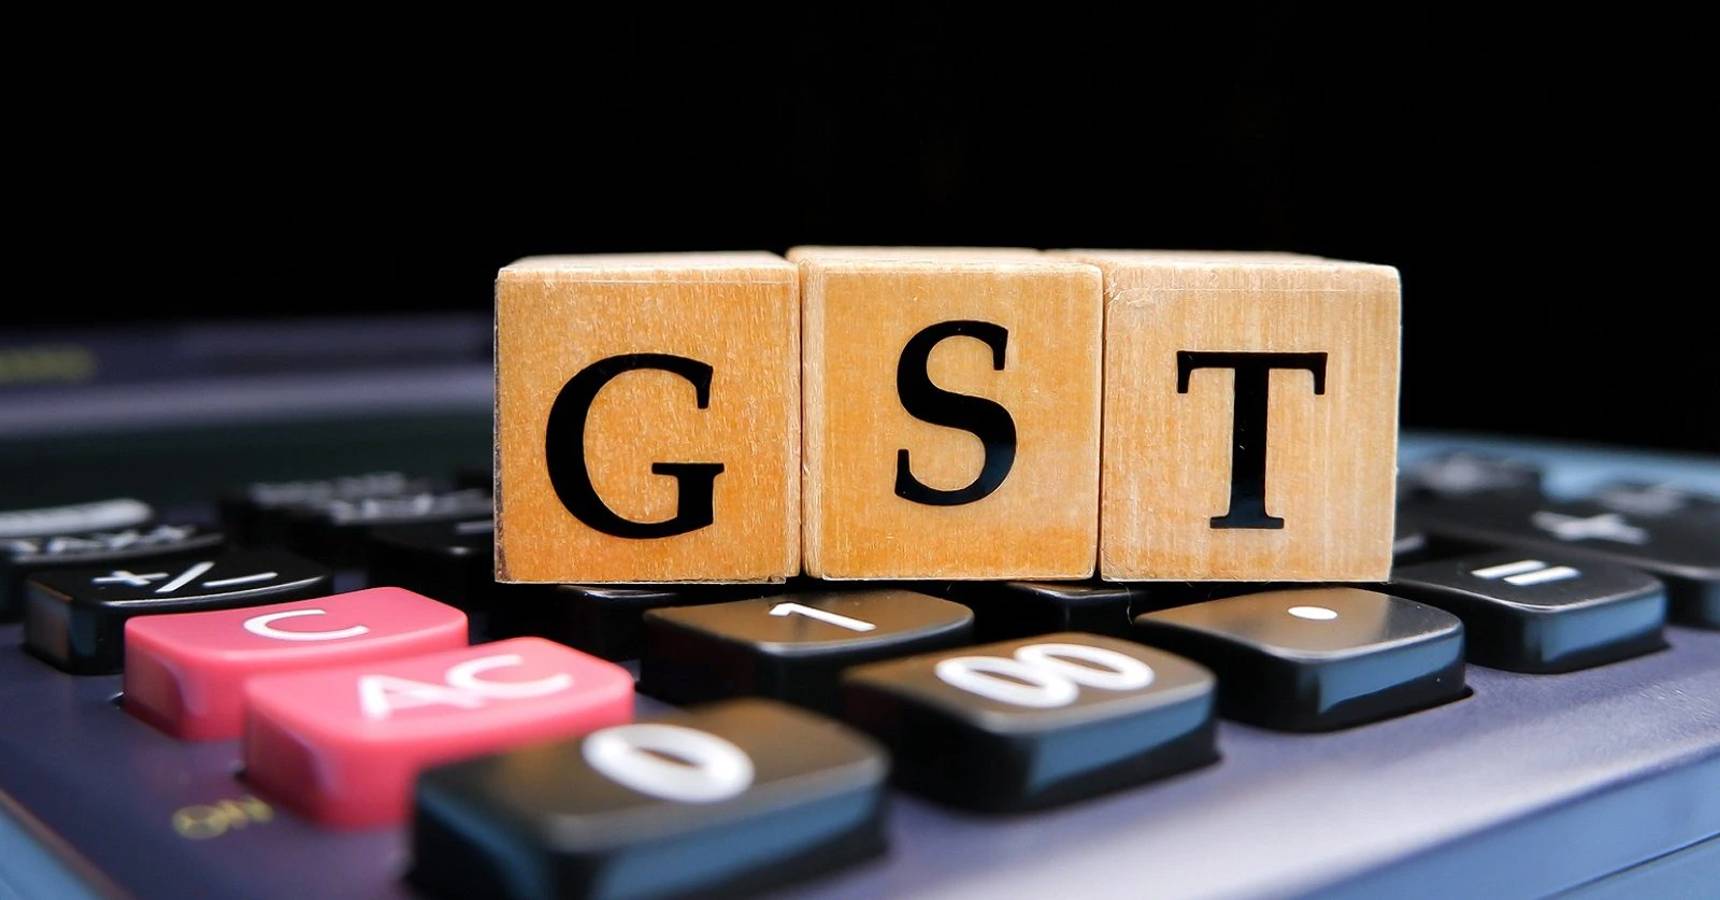  This time, GST is reduced for these things